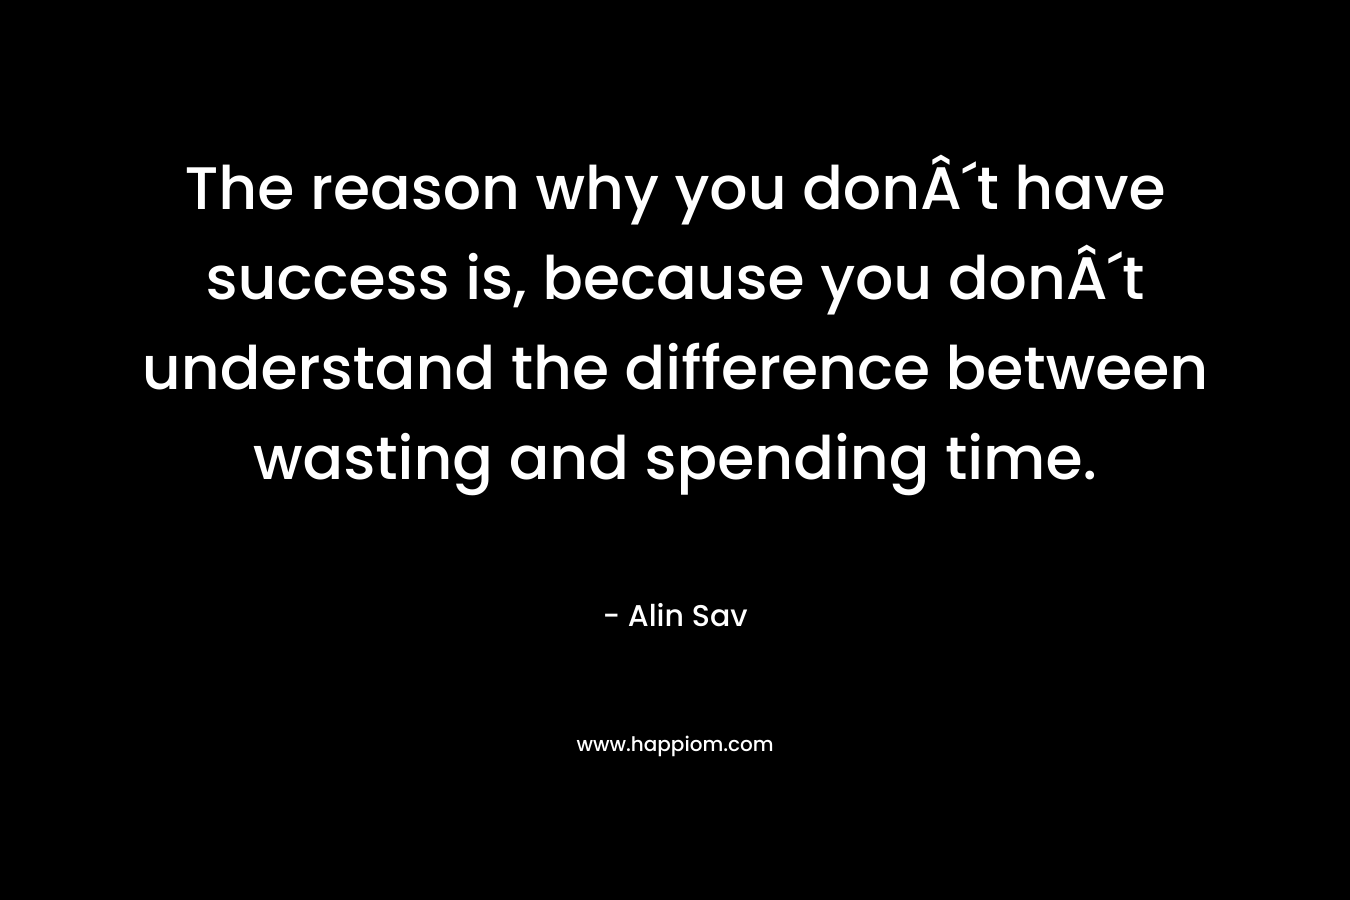 The reason why you donÂ´t have success is, because you donÂ´t understand the difference between wasting and spending time.